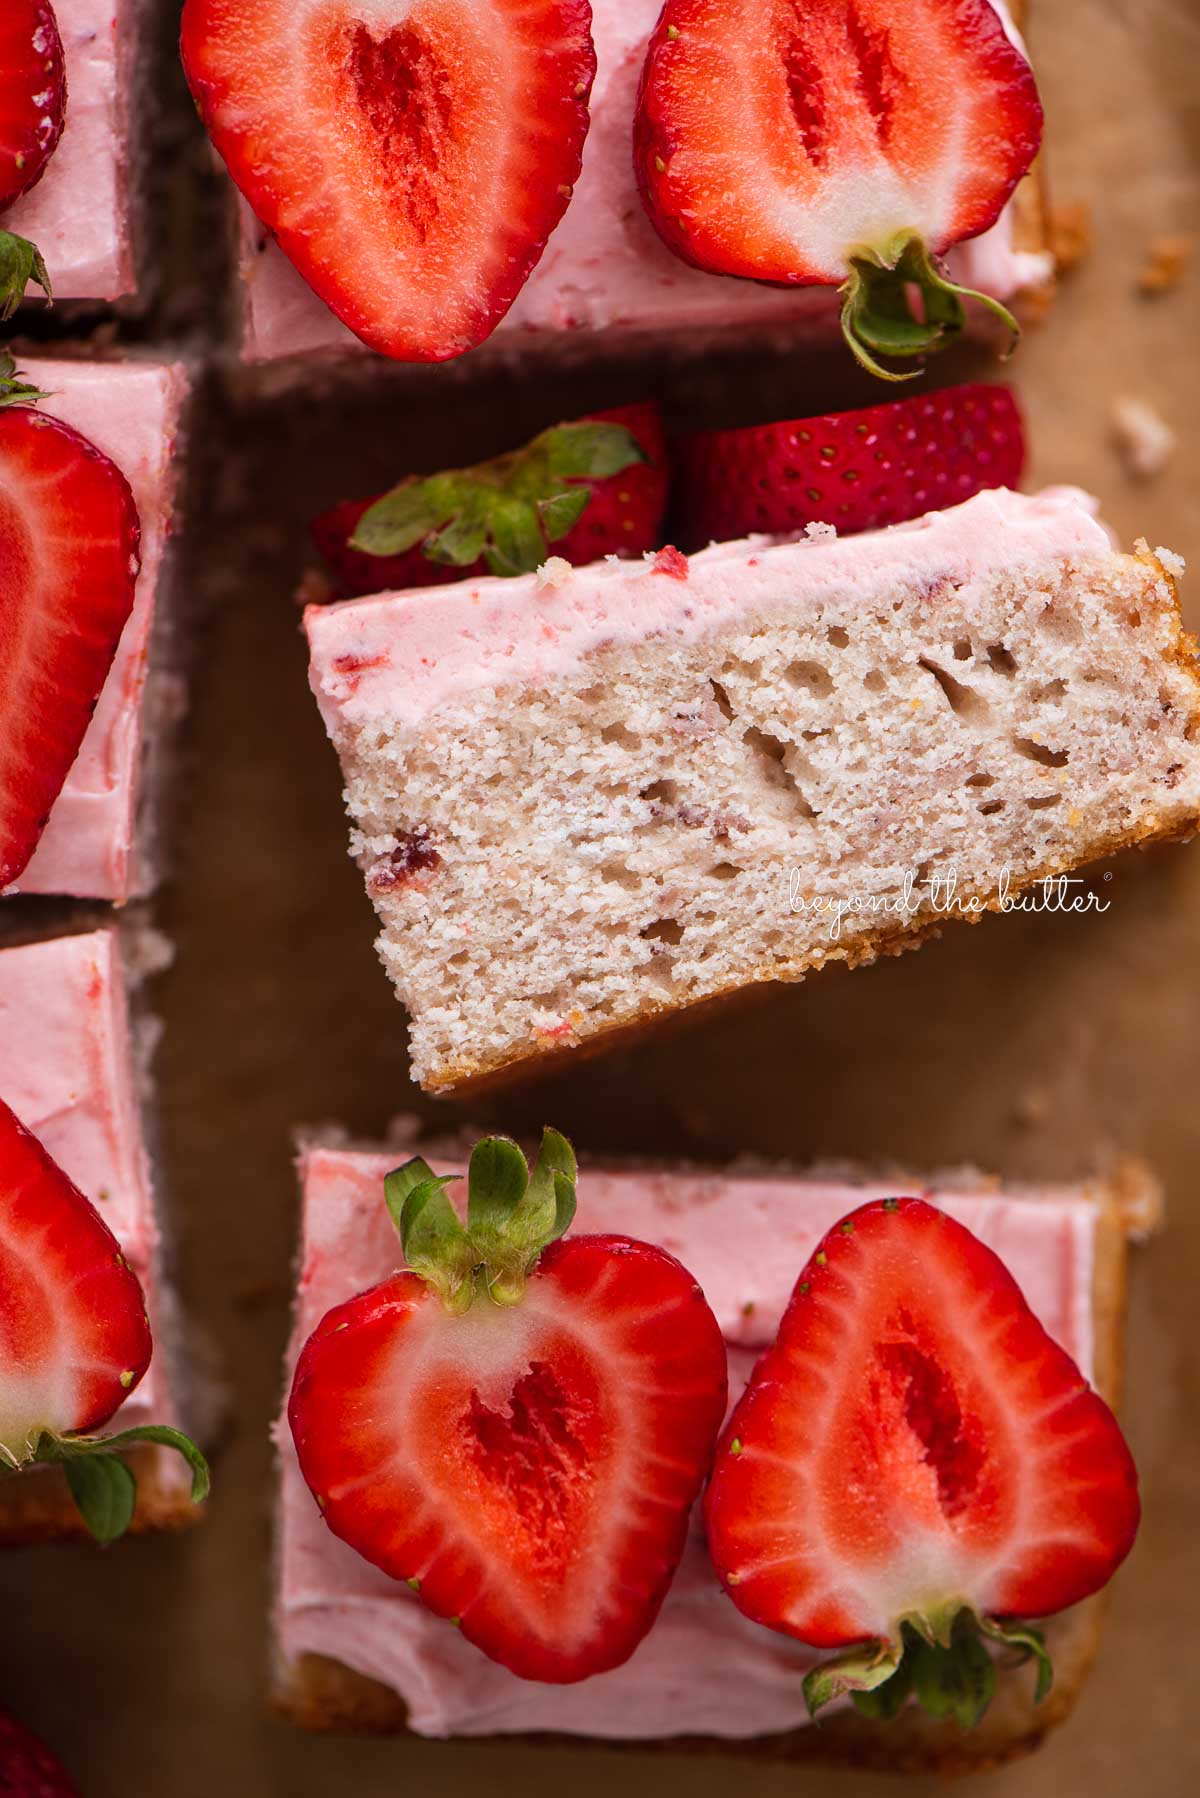 Slices of mini strawberry sheet cake topped with strawberry buttercream frosting and fresh strawberries with one slice on its side | © Beyond the Butter®